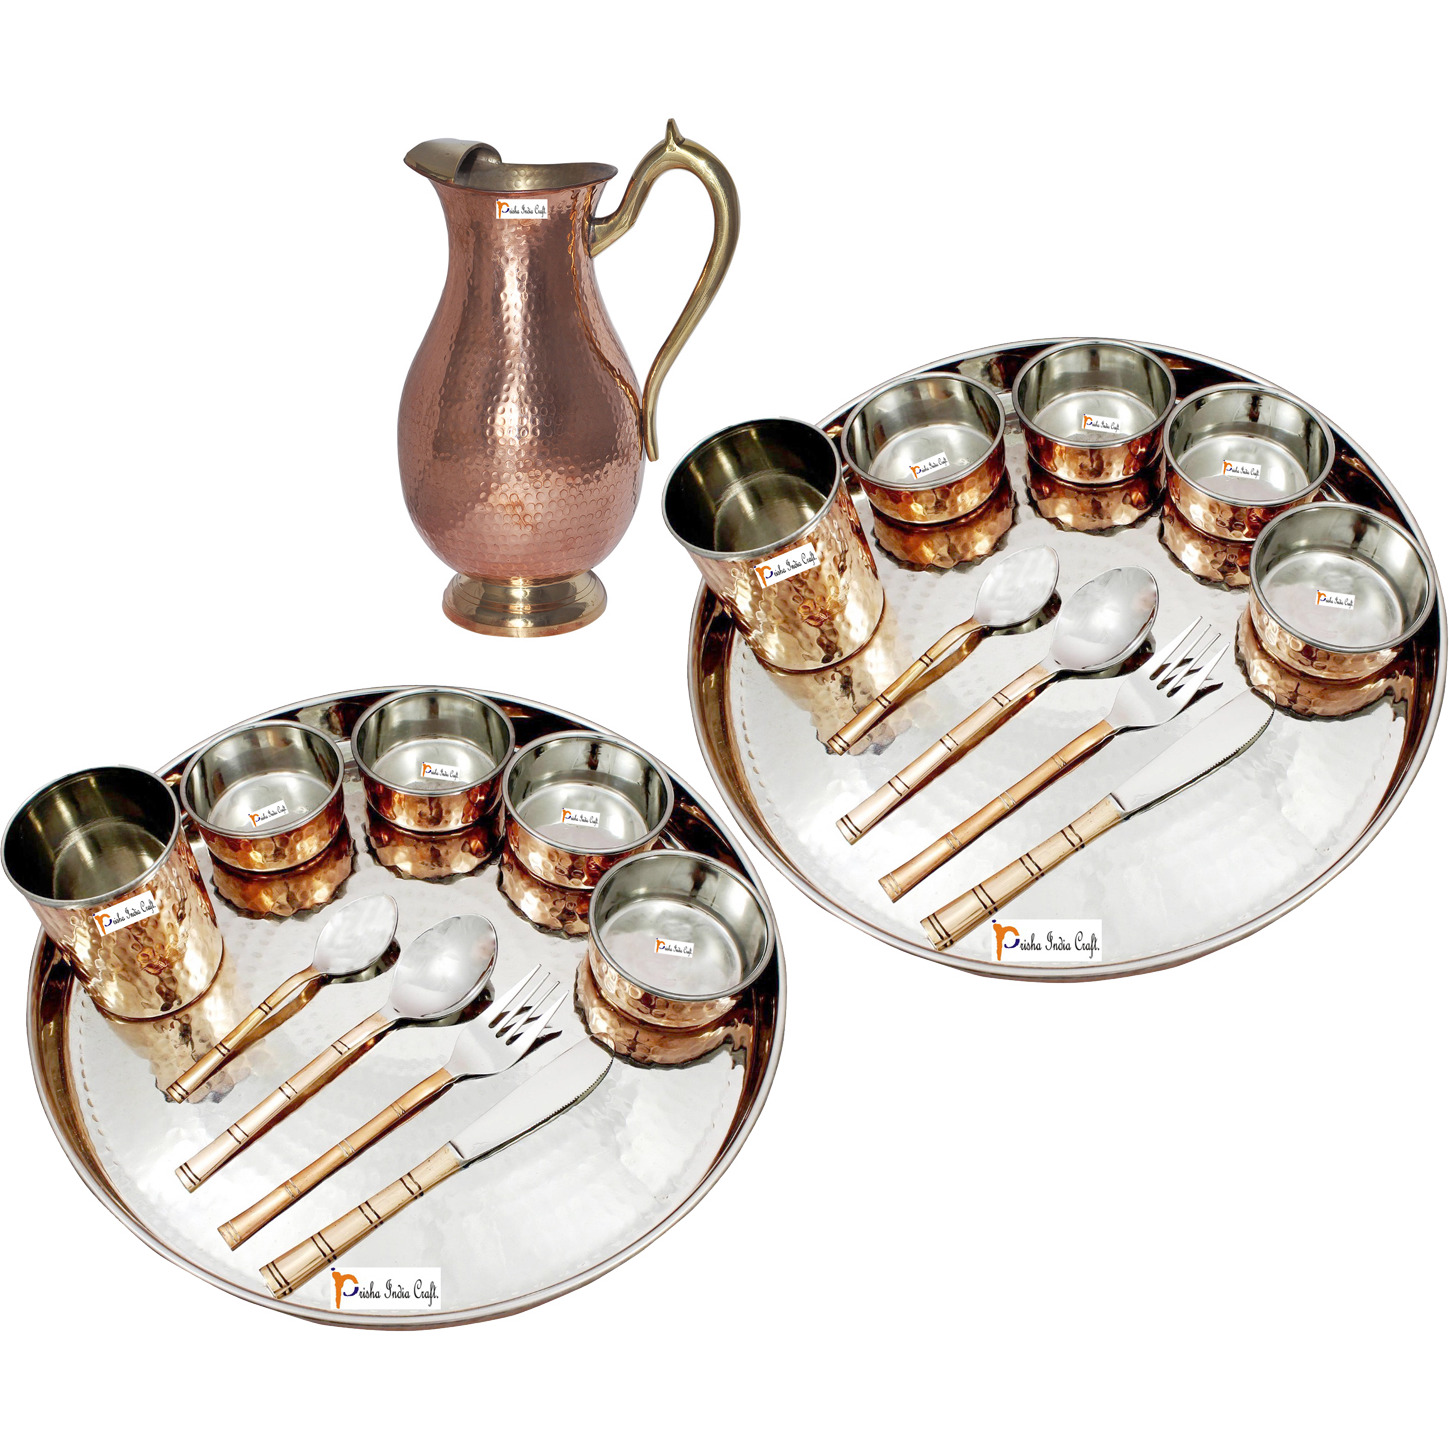 Prisha India Craft B. Set of 2 Dinnerware Traditional Stainless Steel Copper Dinner Set of Thali Plate, Bowls, Glass and Spoons, Dia 13  With 1 Pure Copper Mughal Pitcher Jug - Christmas Gift